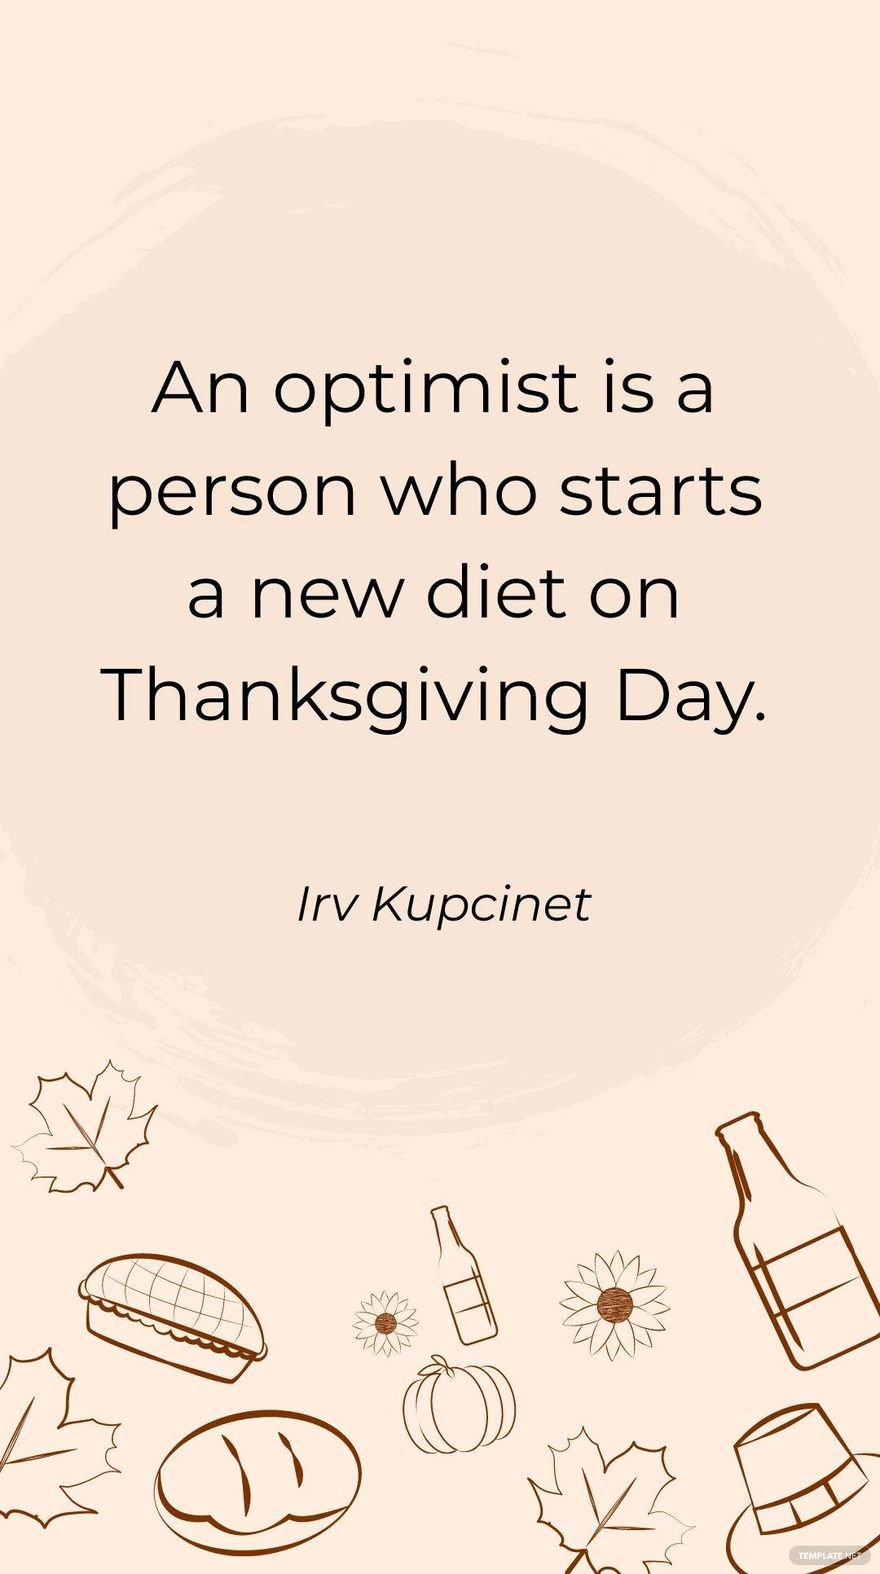 Free Irv Kupcinet - An optimist is a person who starts a new diet on Thanksgiving Day.